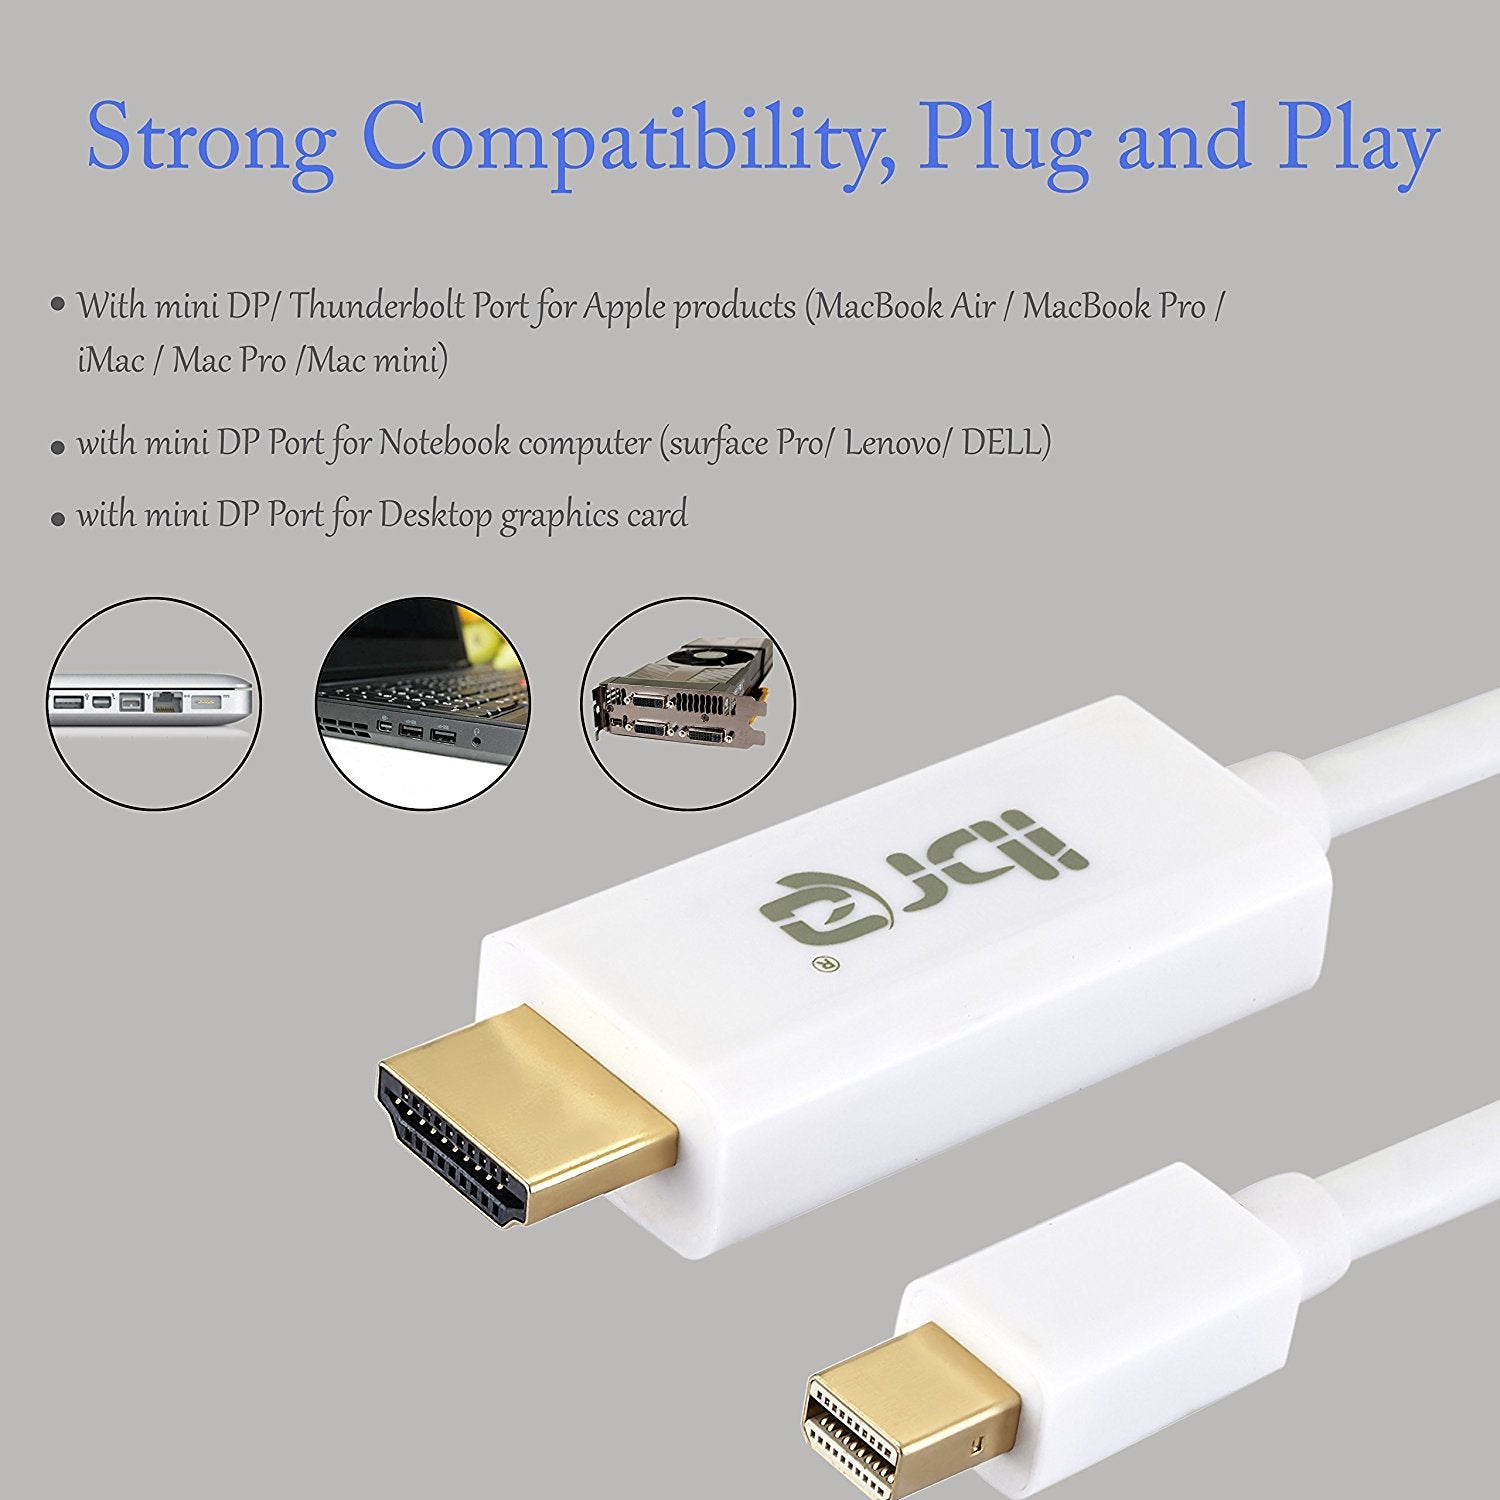 3M-IBRA Mini Display Port DP to HDMI Cable Adapter For iMac MacBook Pro Air LCD TV | Thunderbolt Compatible